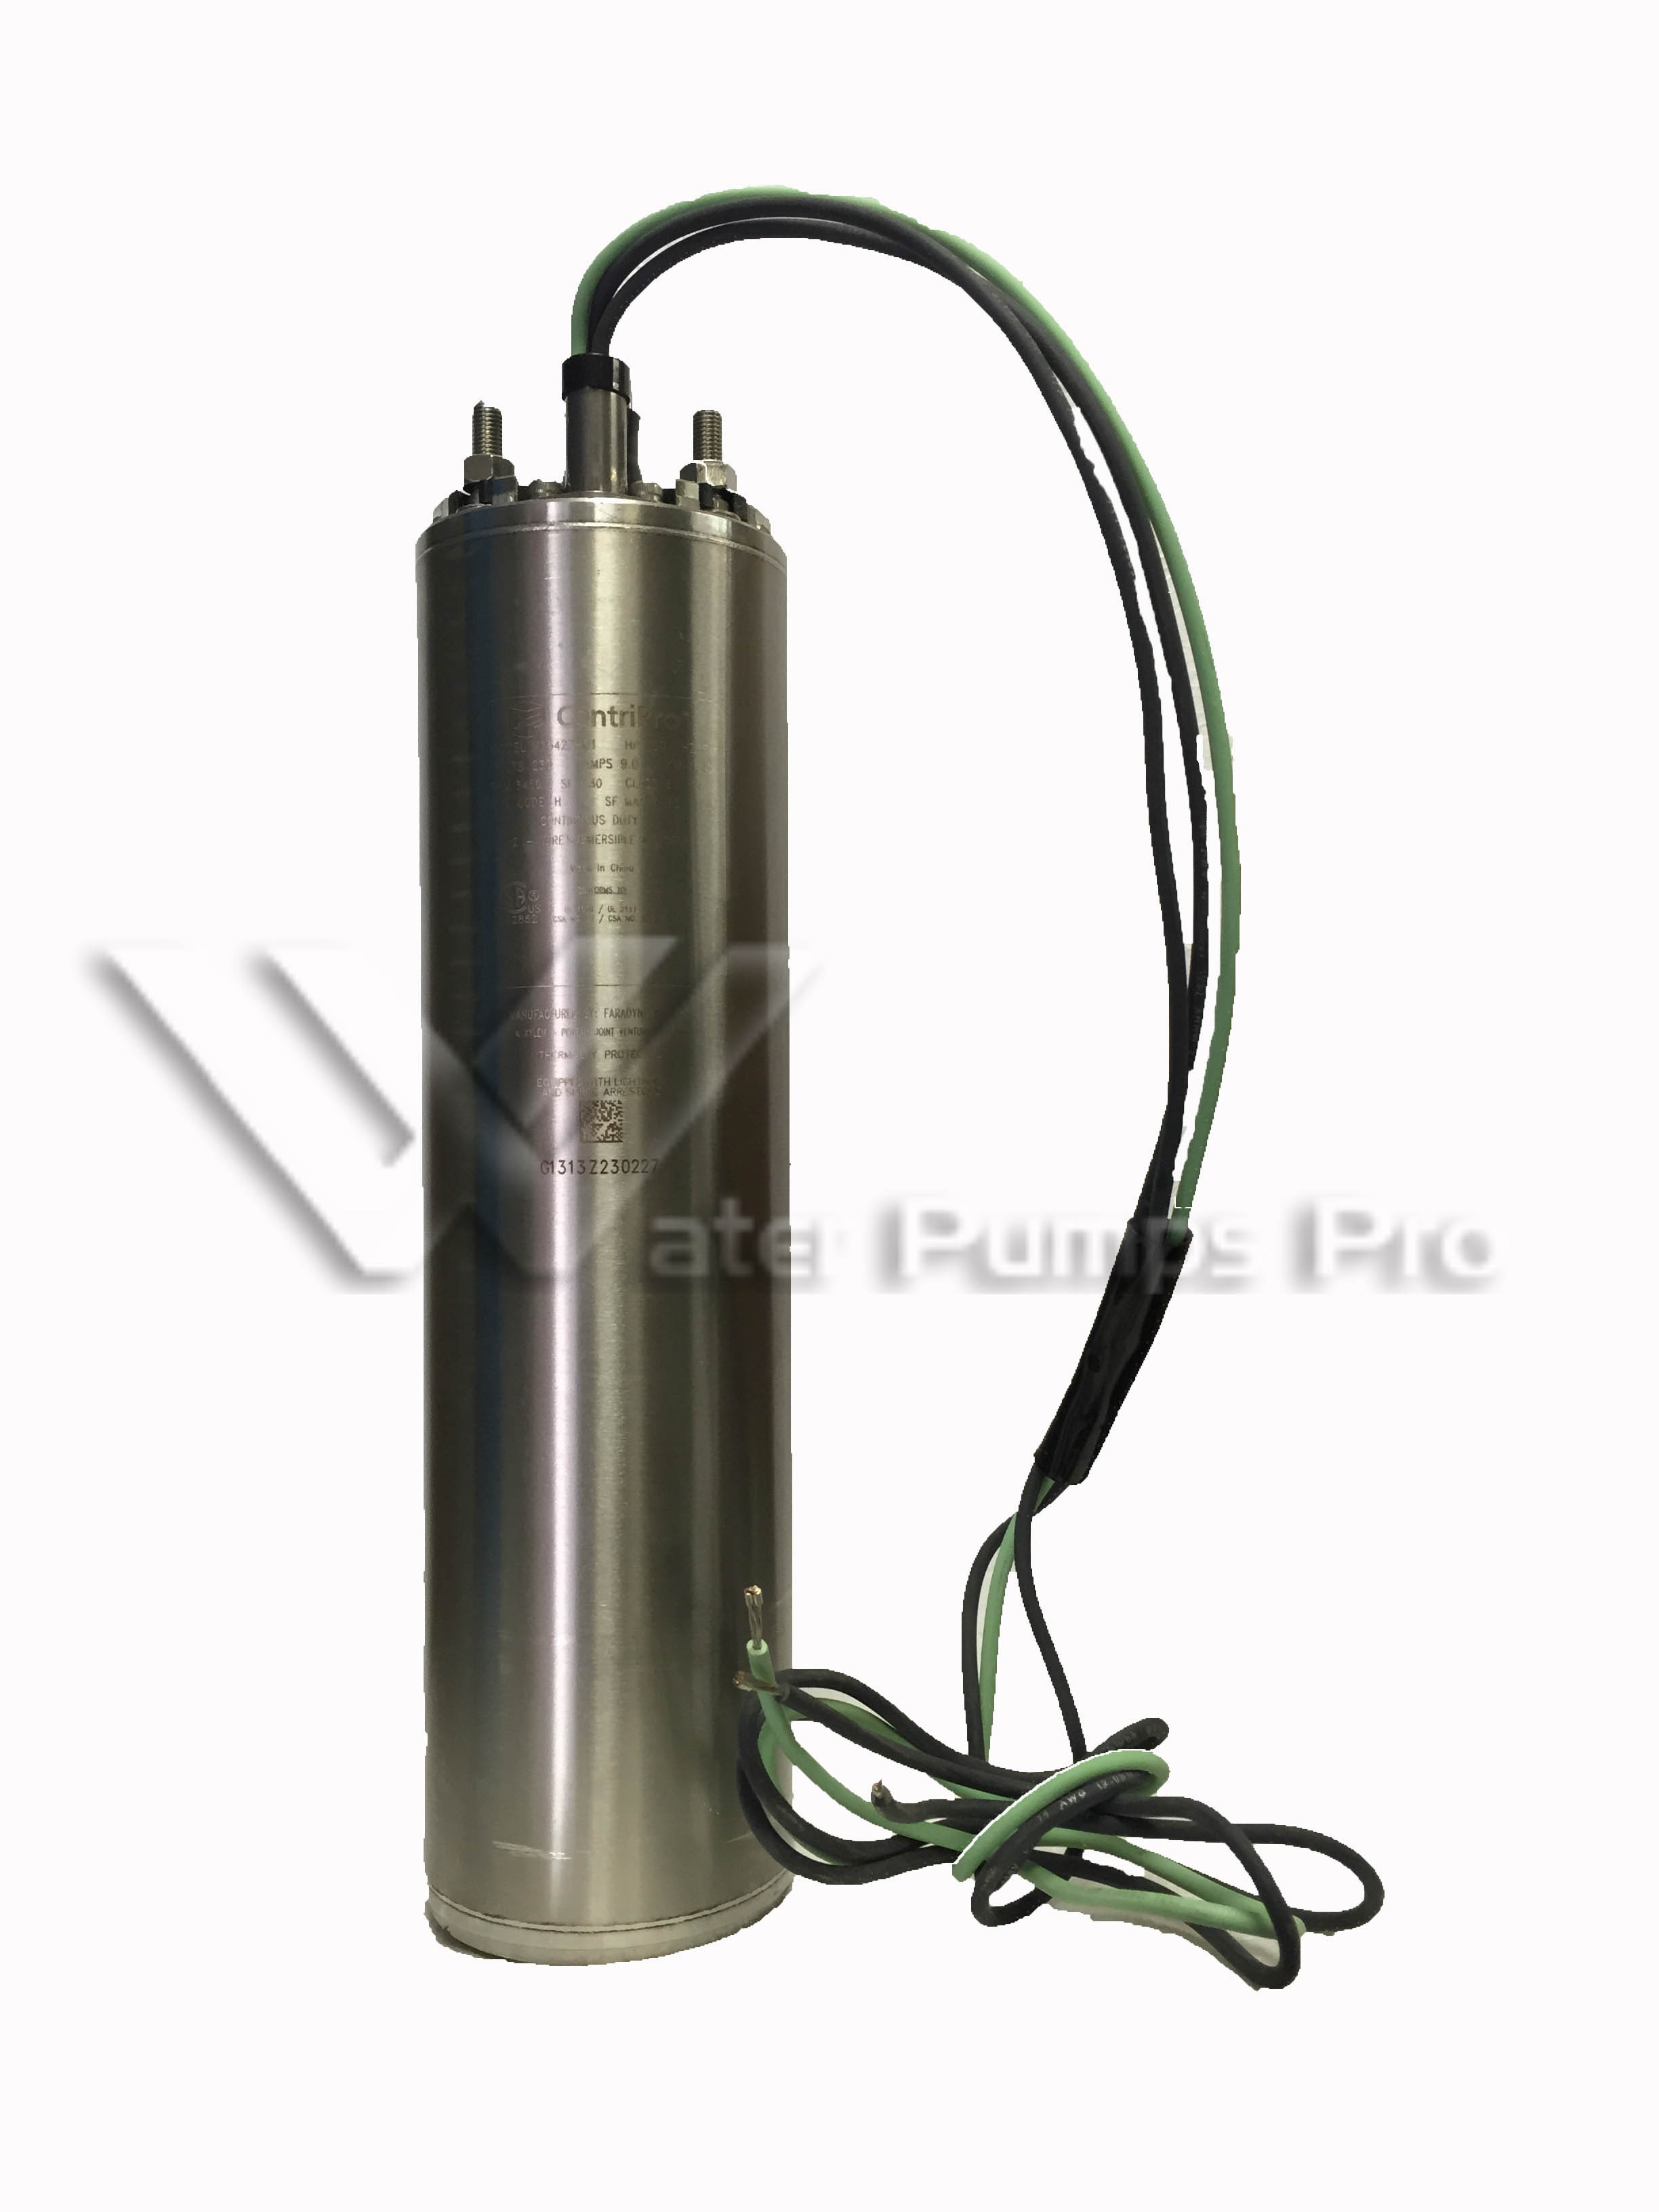 Goulds M07422 3/4HP 4" Submersible Motor 230V 2 Wire 1Phase 60Hz - Click Image to Close